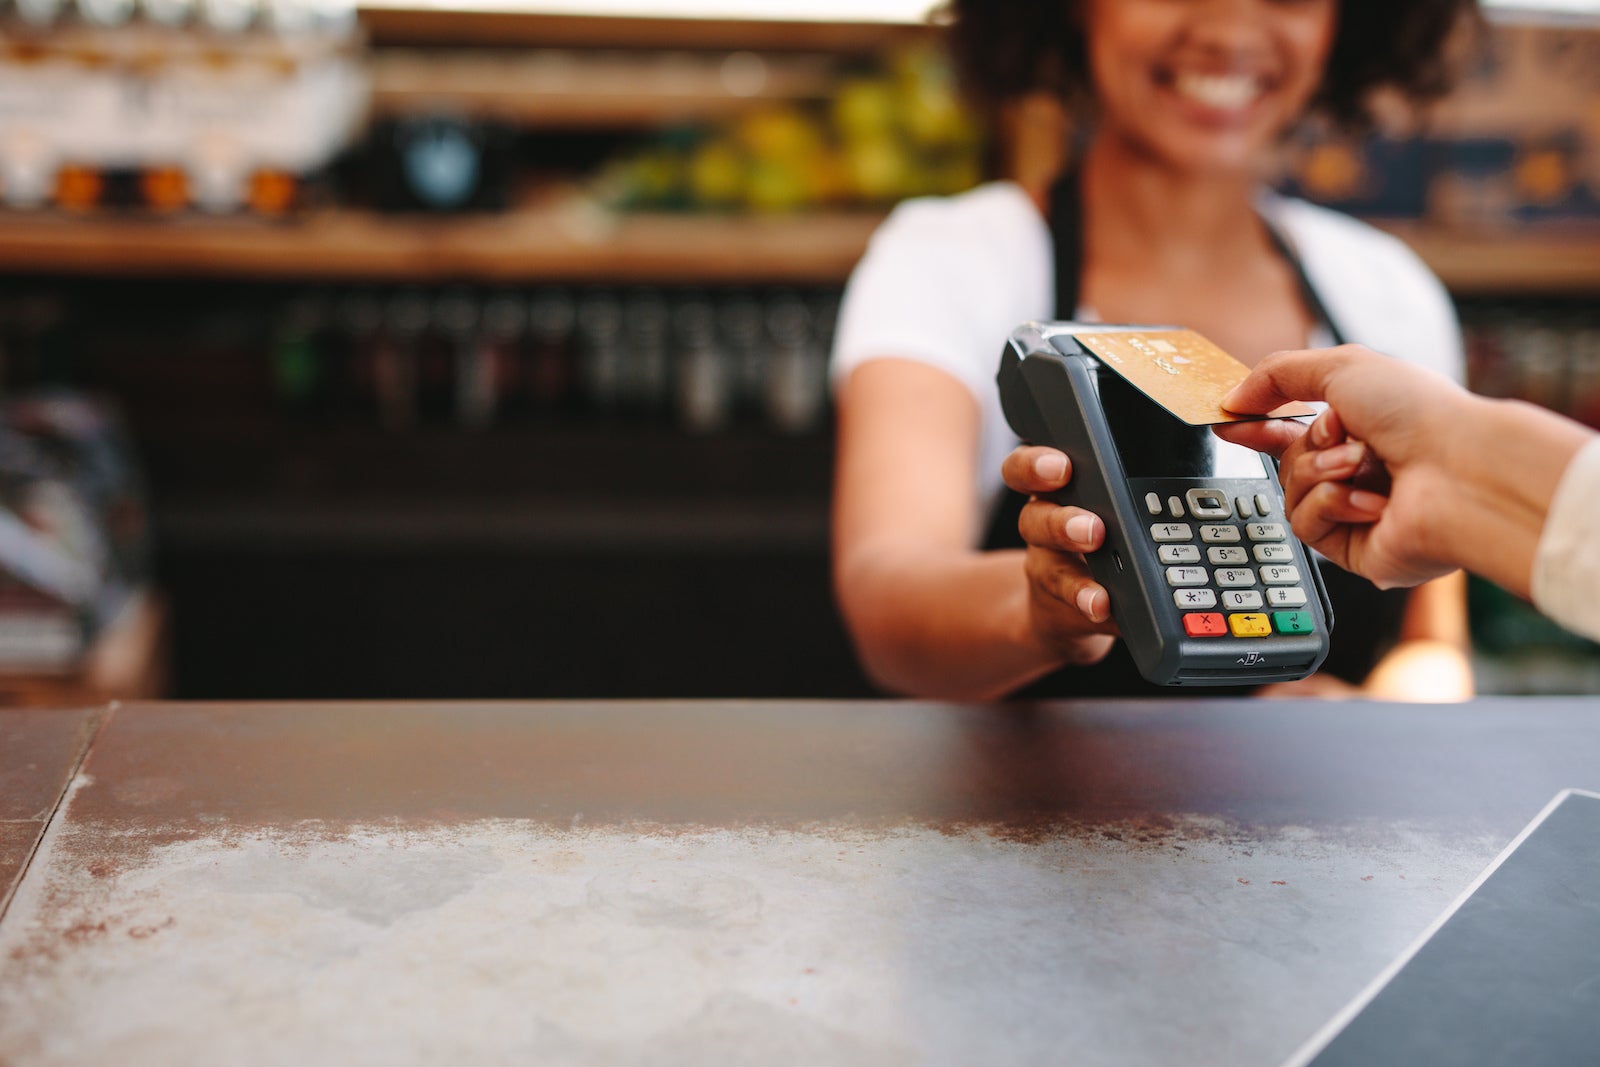 Customer,Making,Wireless,Or,Contactless,Payment,Using,Credit,Card.,Smiling